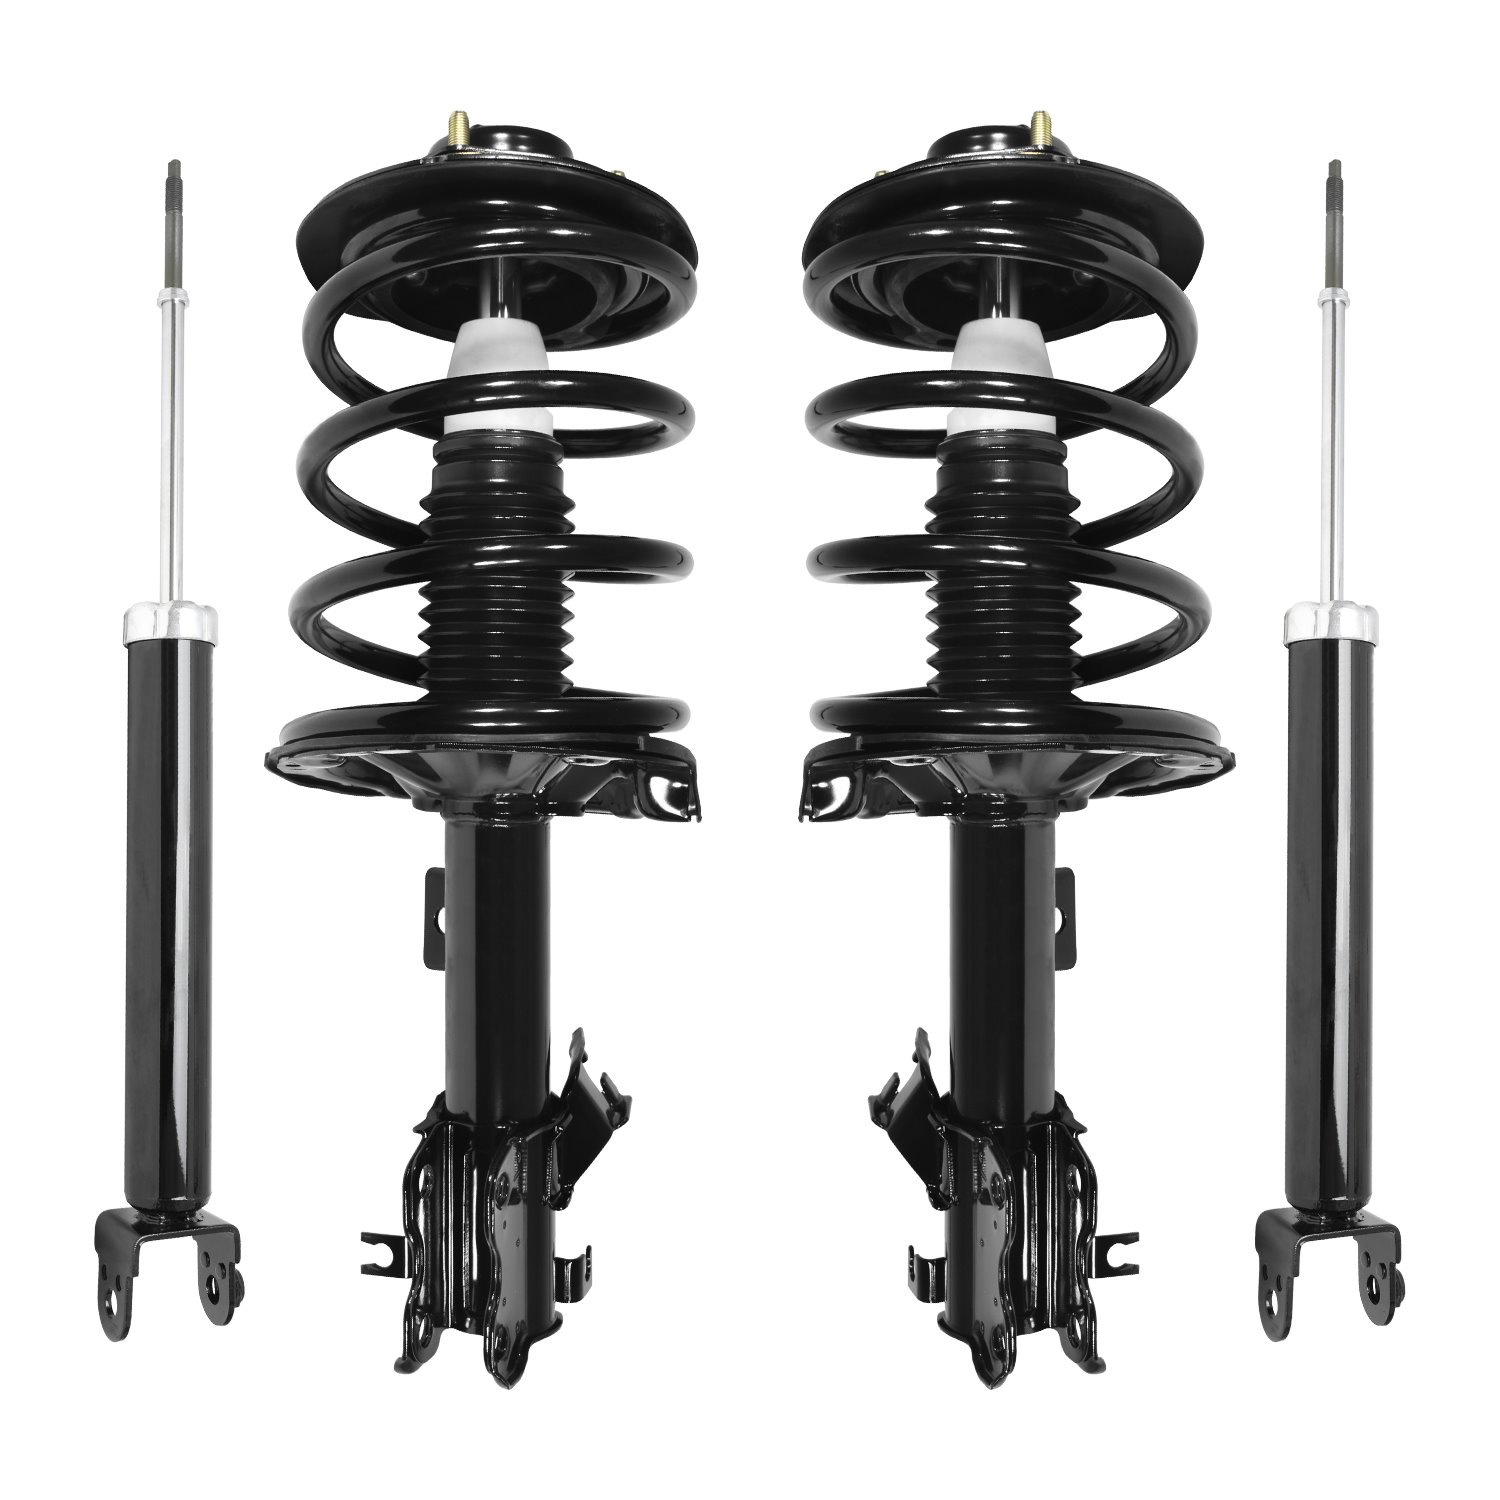 4-11591-255010-001 Front & Rear Suspension Strut & Coil Spring Assembly Fits Select Nissan Altima